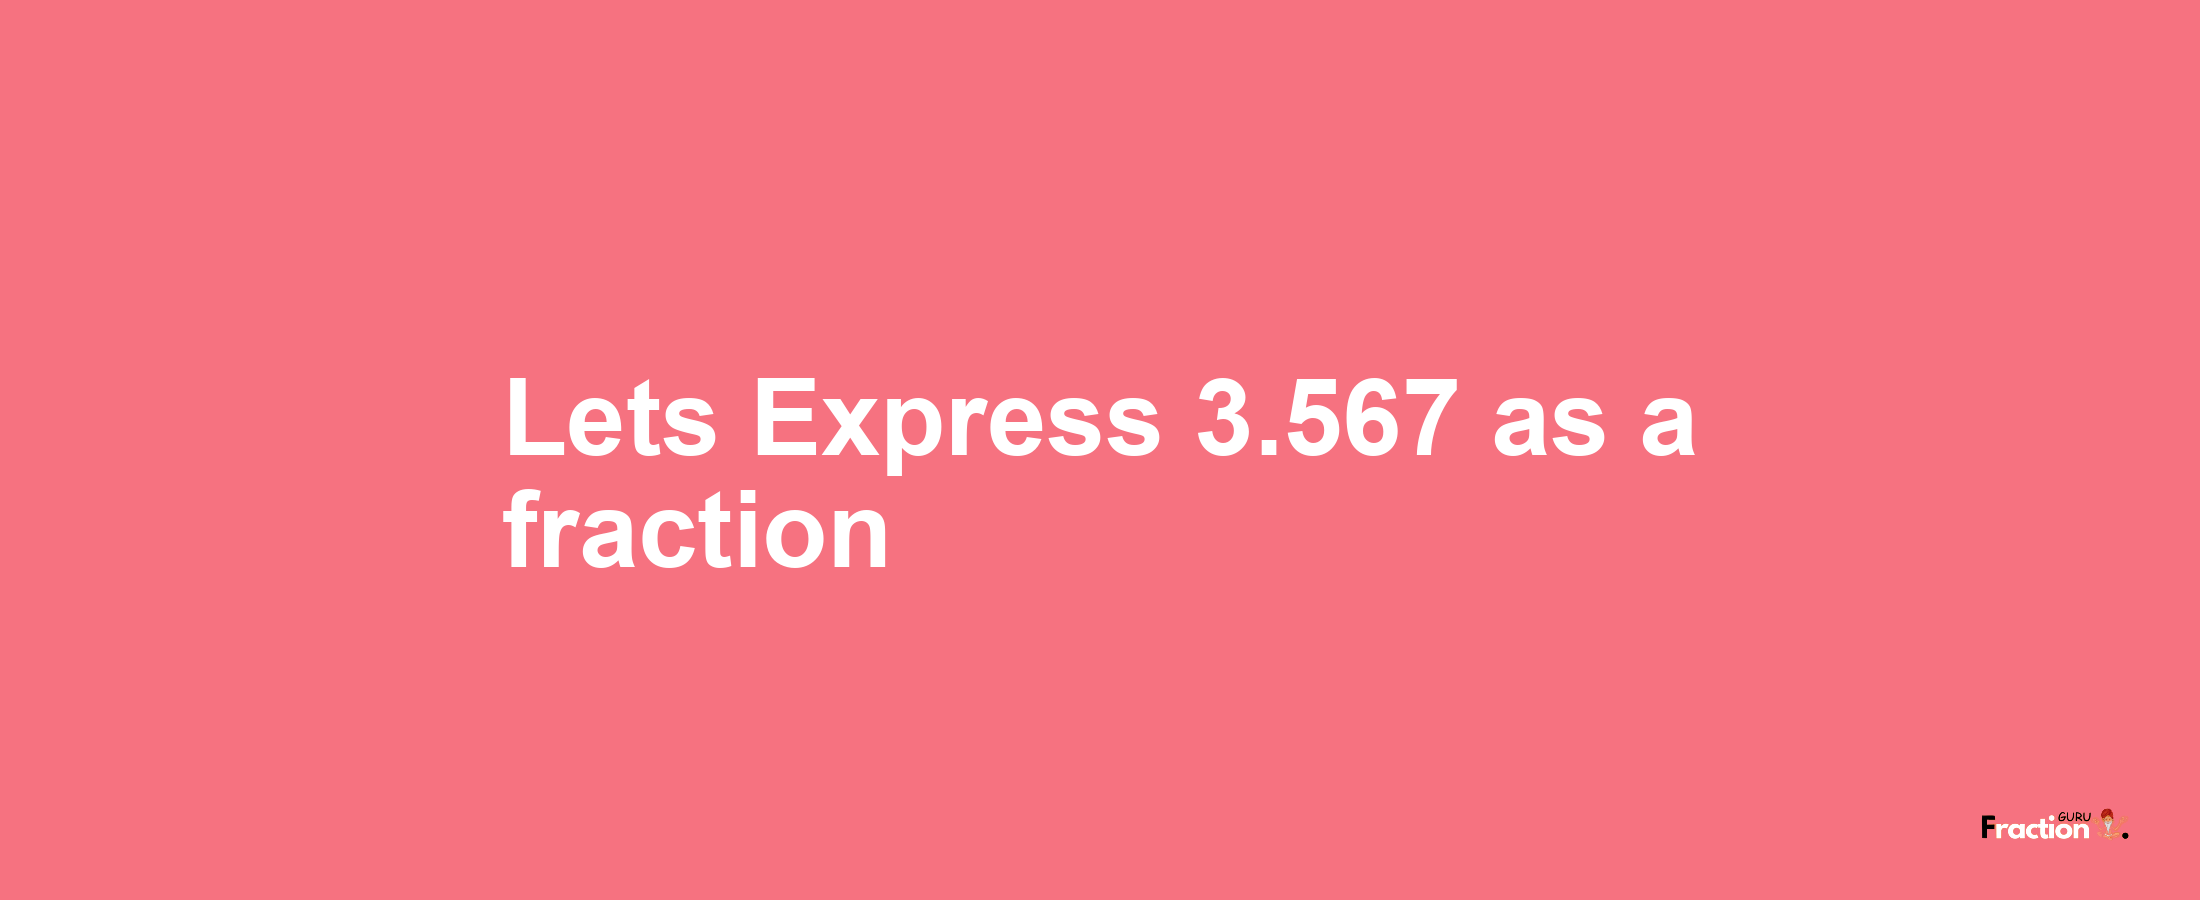 Lets Express 3.567 as afraction